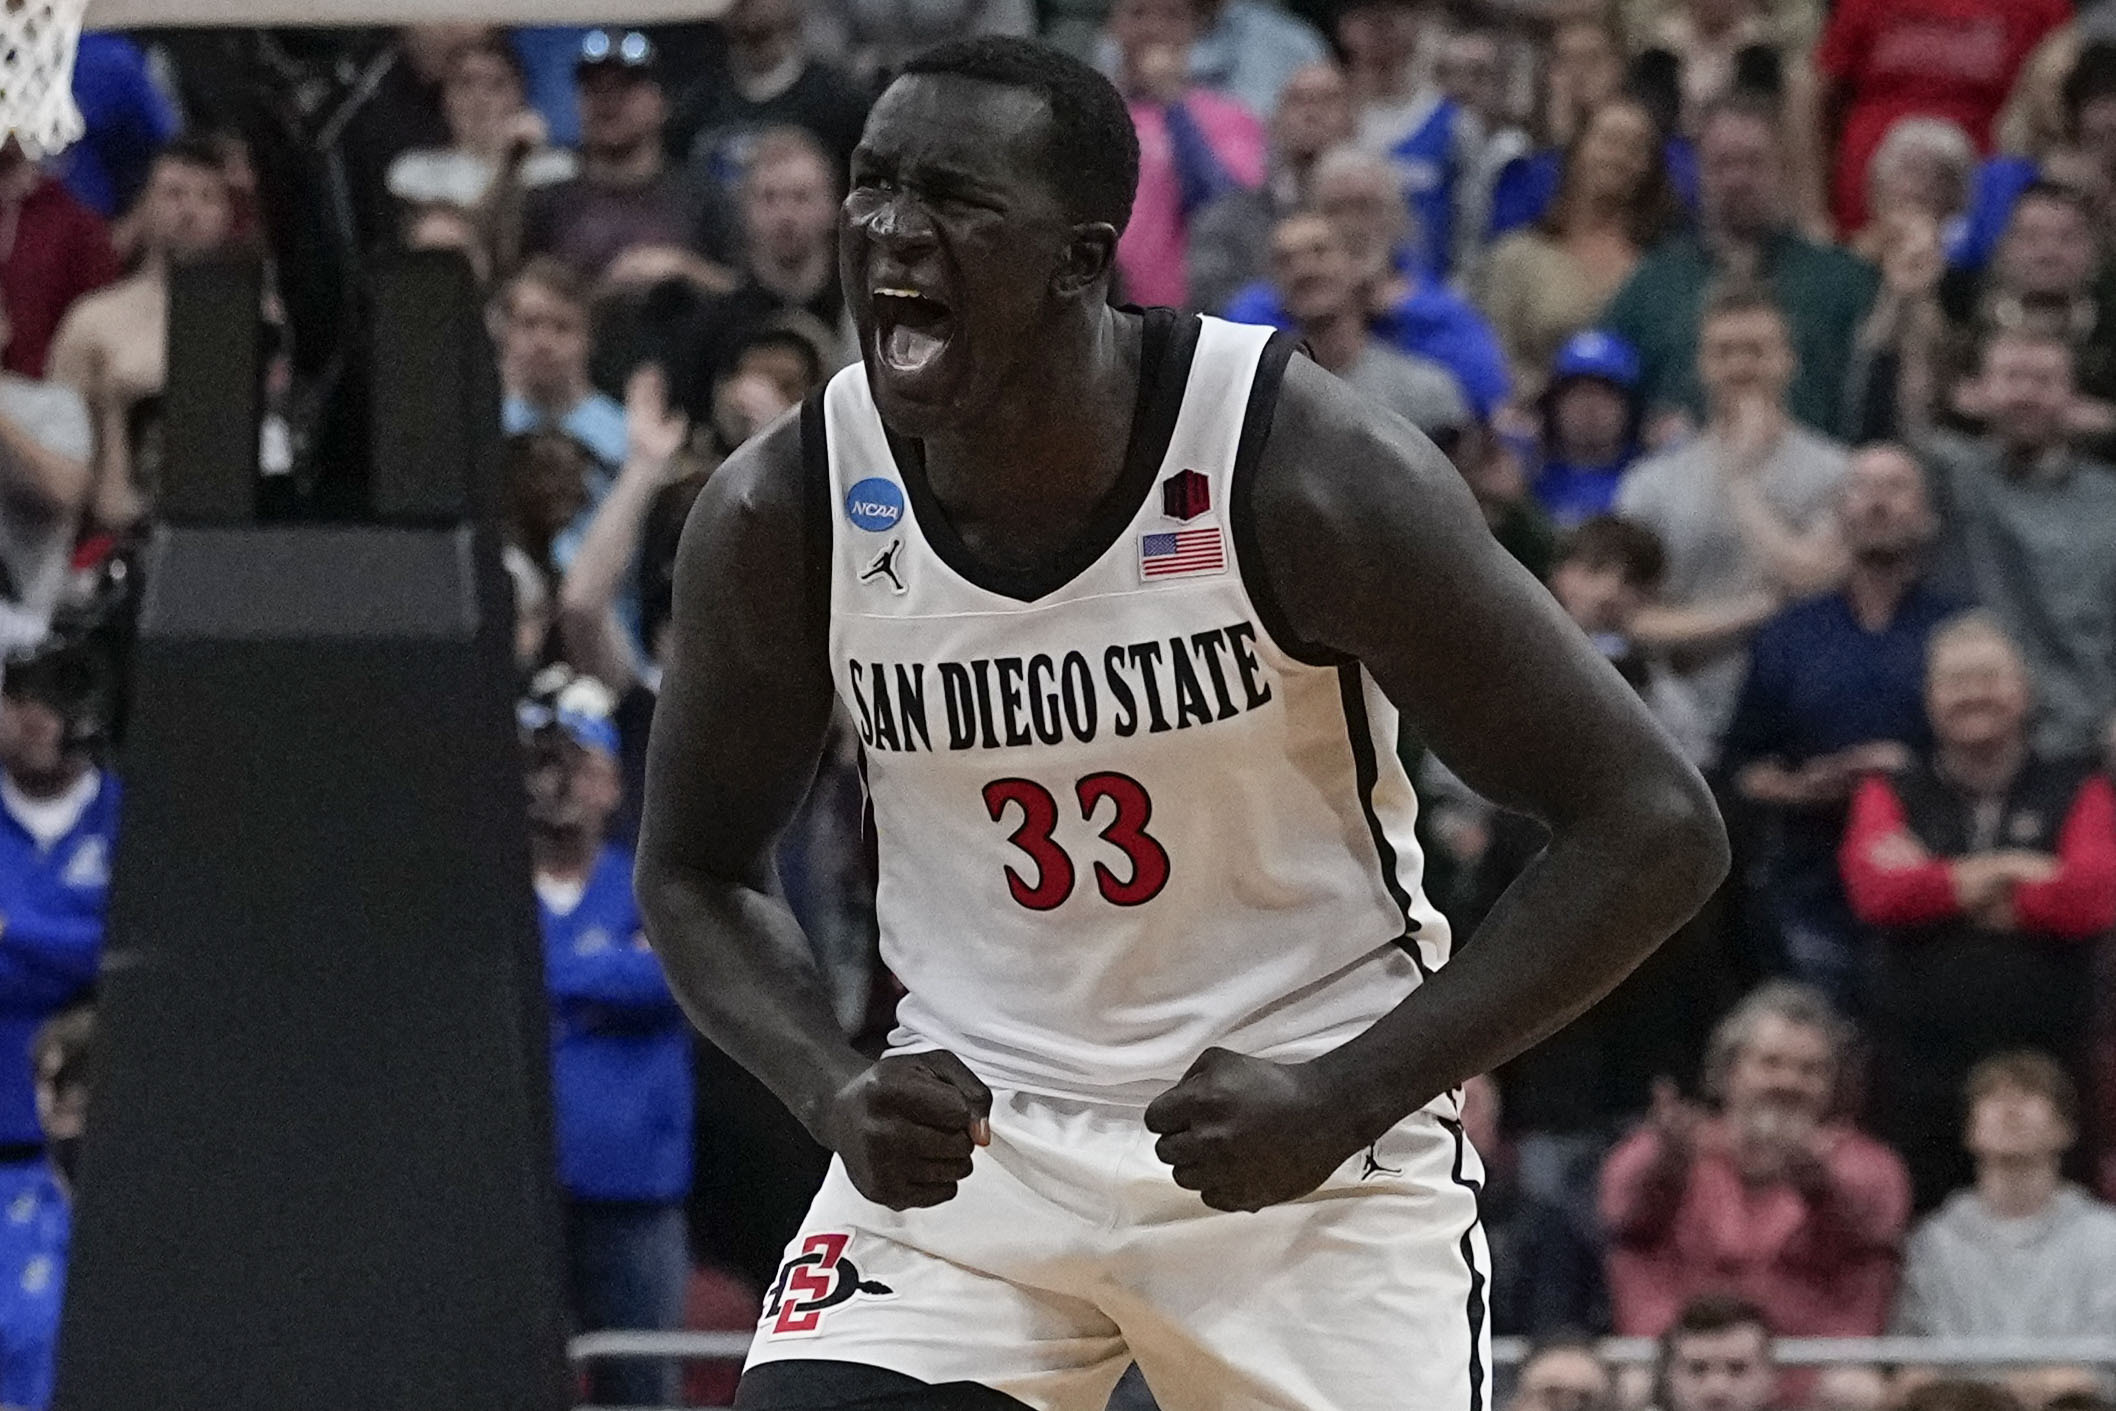 San Diego State vs Florida Atlantic basketball free live stream, TV channel for Final Four game (4/1/2023)